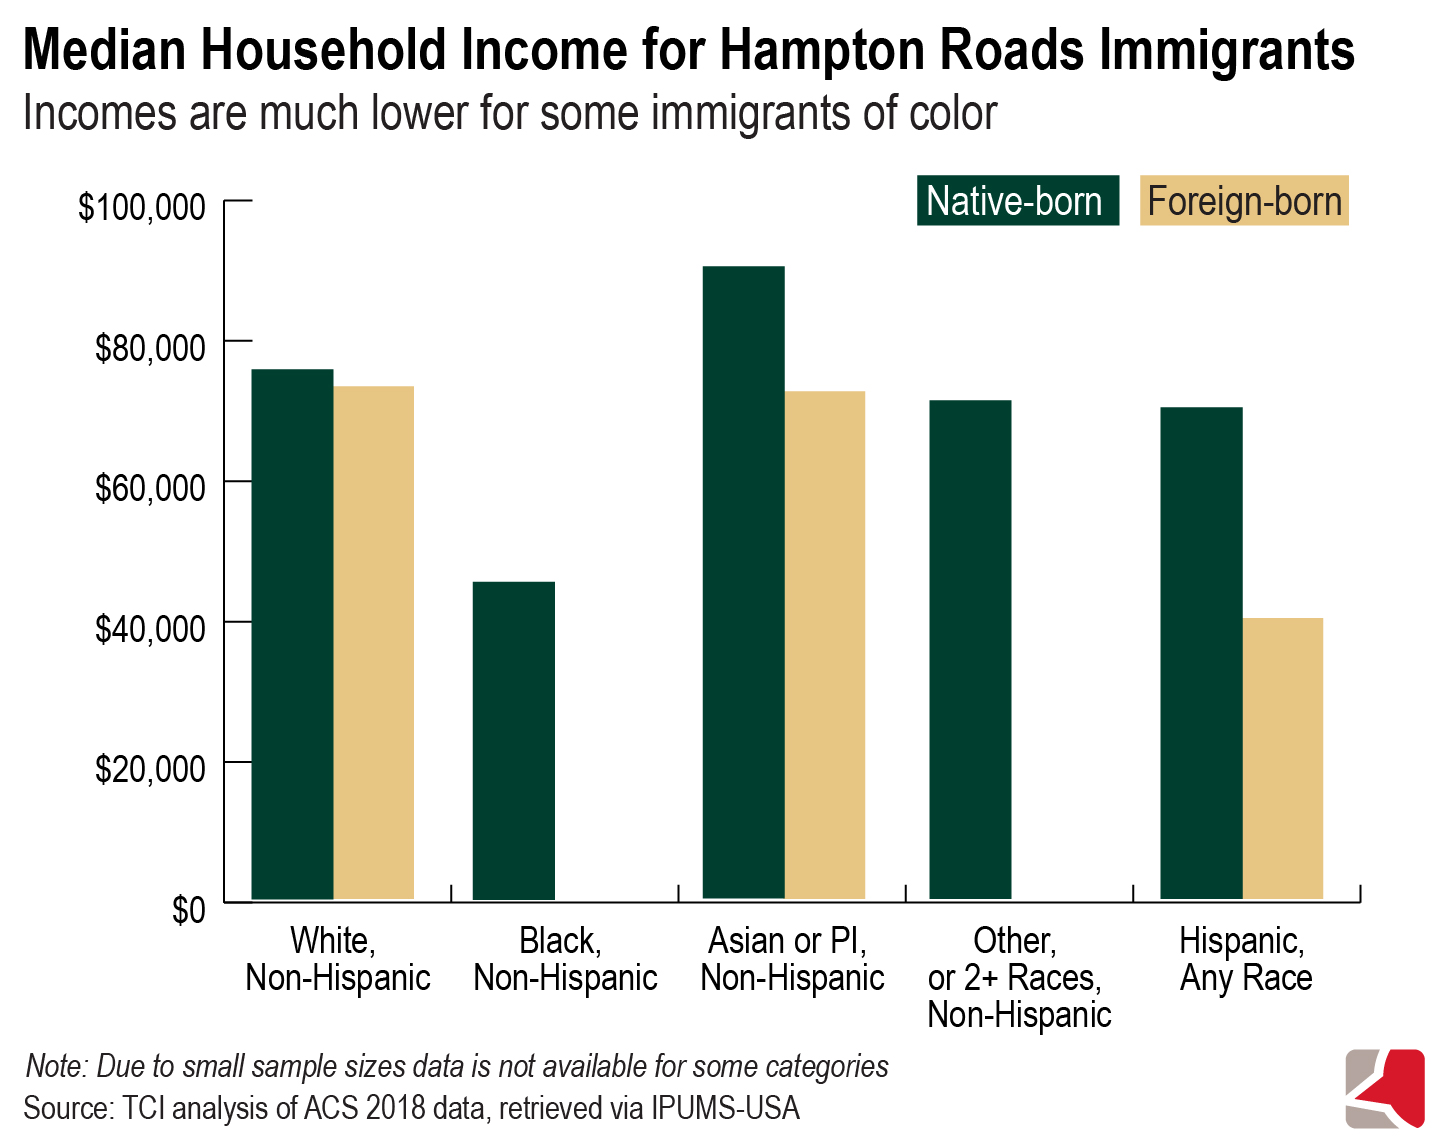 Bar graph showing median household income for Hampton Roads immigrants compared to native-born Virginians by race and ethnicity, based on analysis of ACS 2018 data via IPUMS-USA